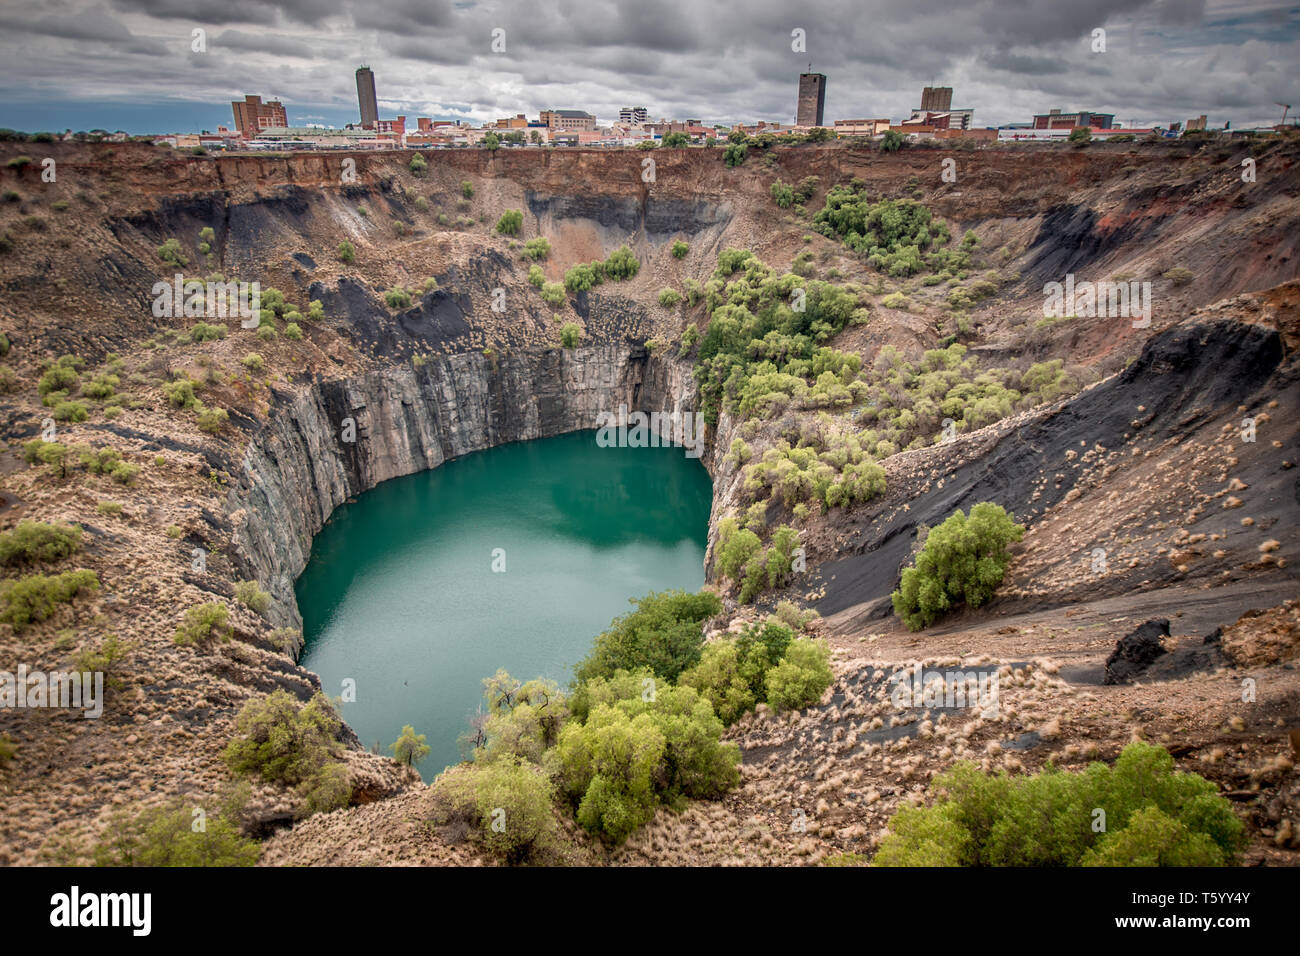 Wide view of The Big Hole in Kimberley, a result of the mining industry, with the town skyline on the edge Stock Photo